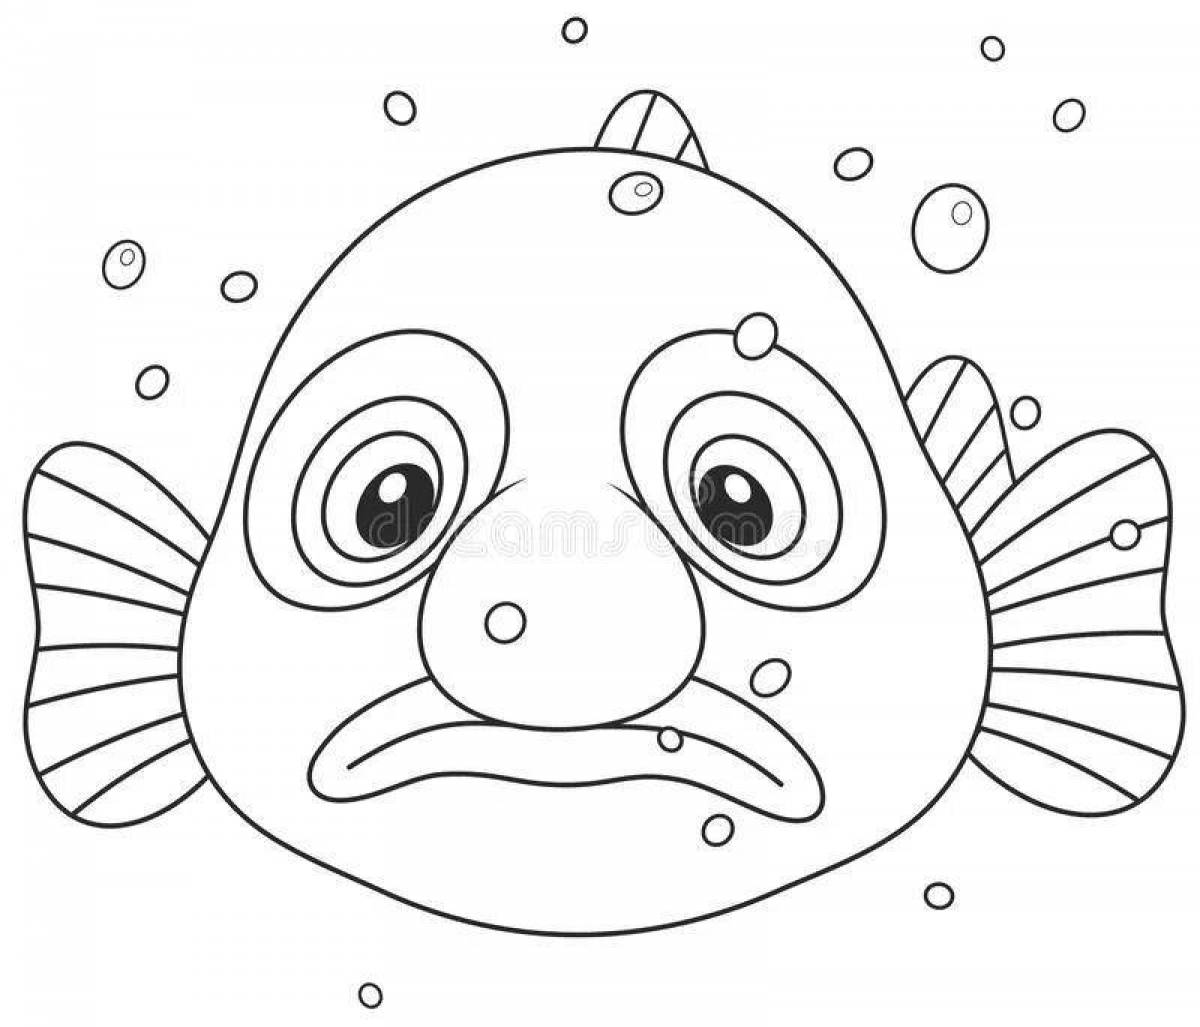 Colourful blobfish coloring page